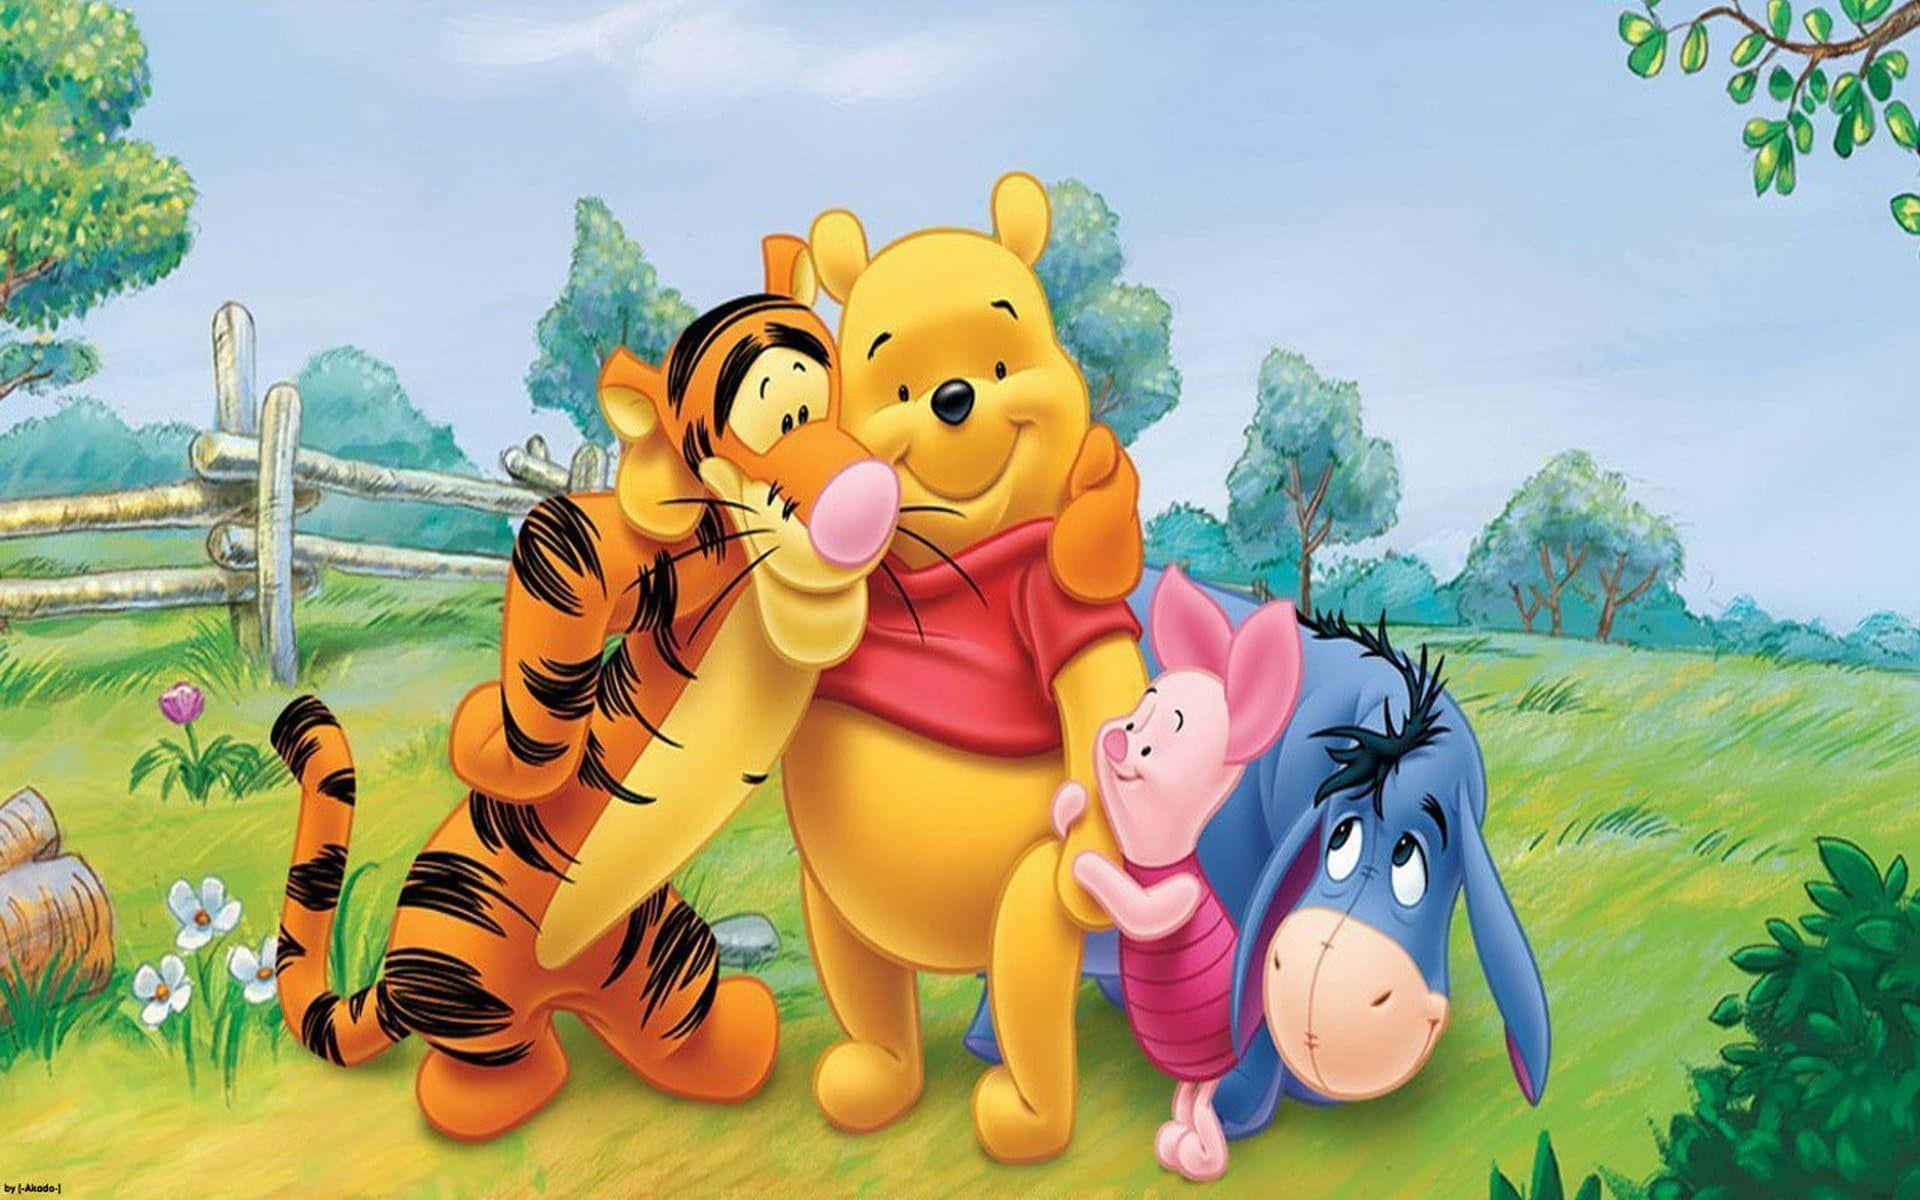 Winnie The Pooh enjoying the Spring outdoors Wallpaper